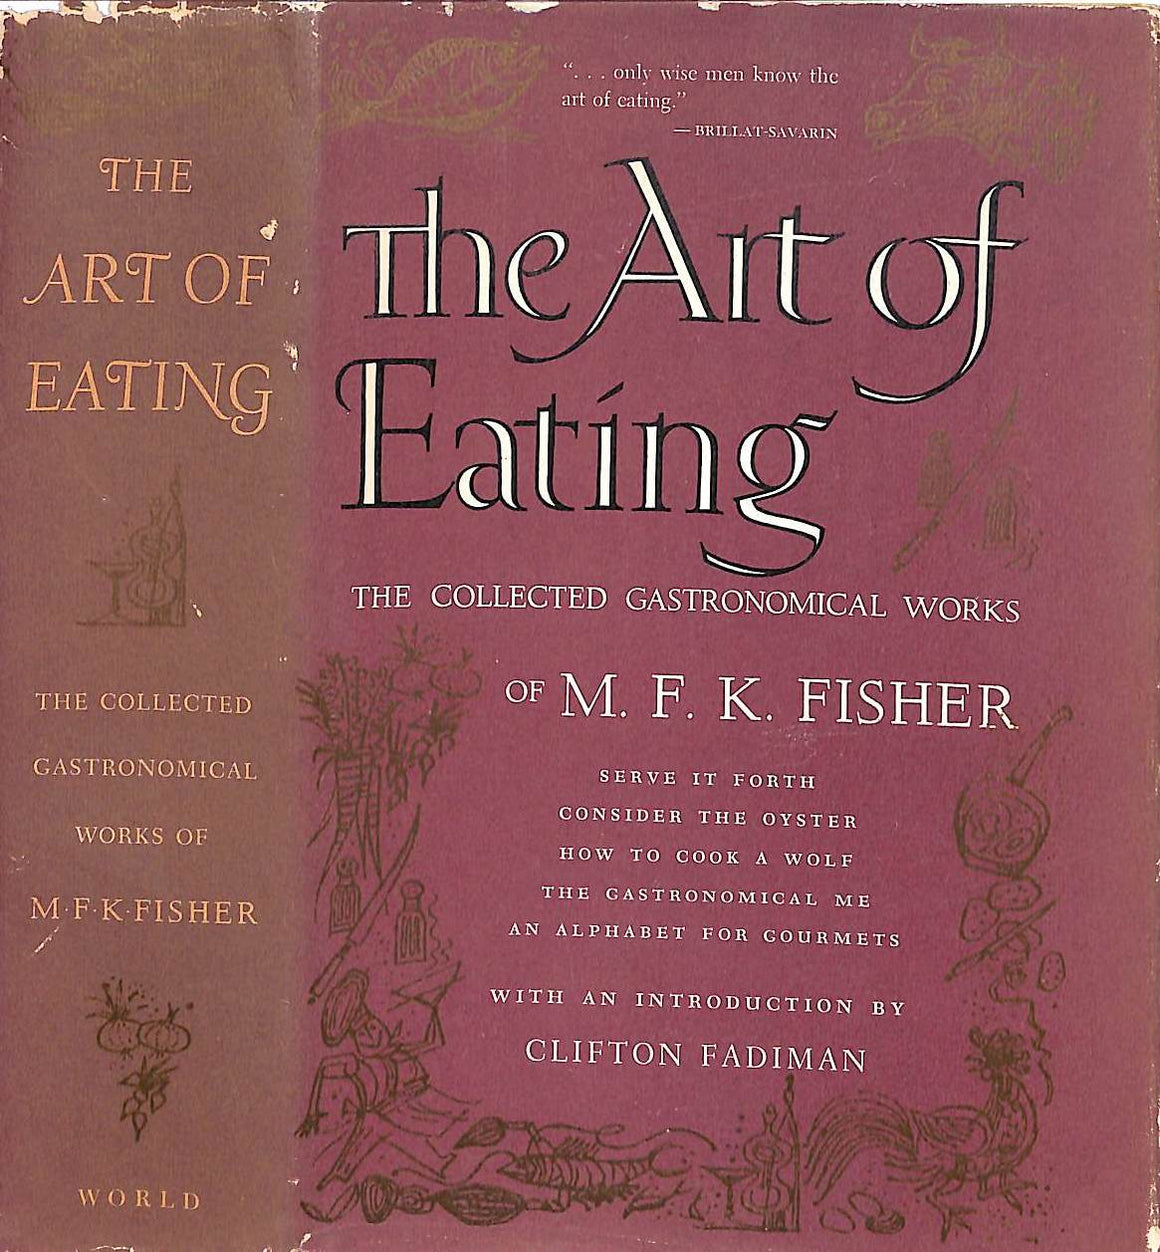 "The Art Of Eating: The Collected Gastronomical Works" 1954 FISHER, M. F. K.